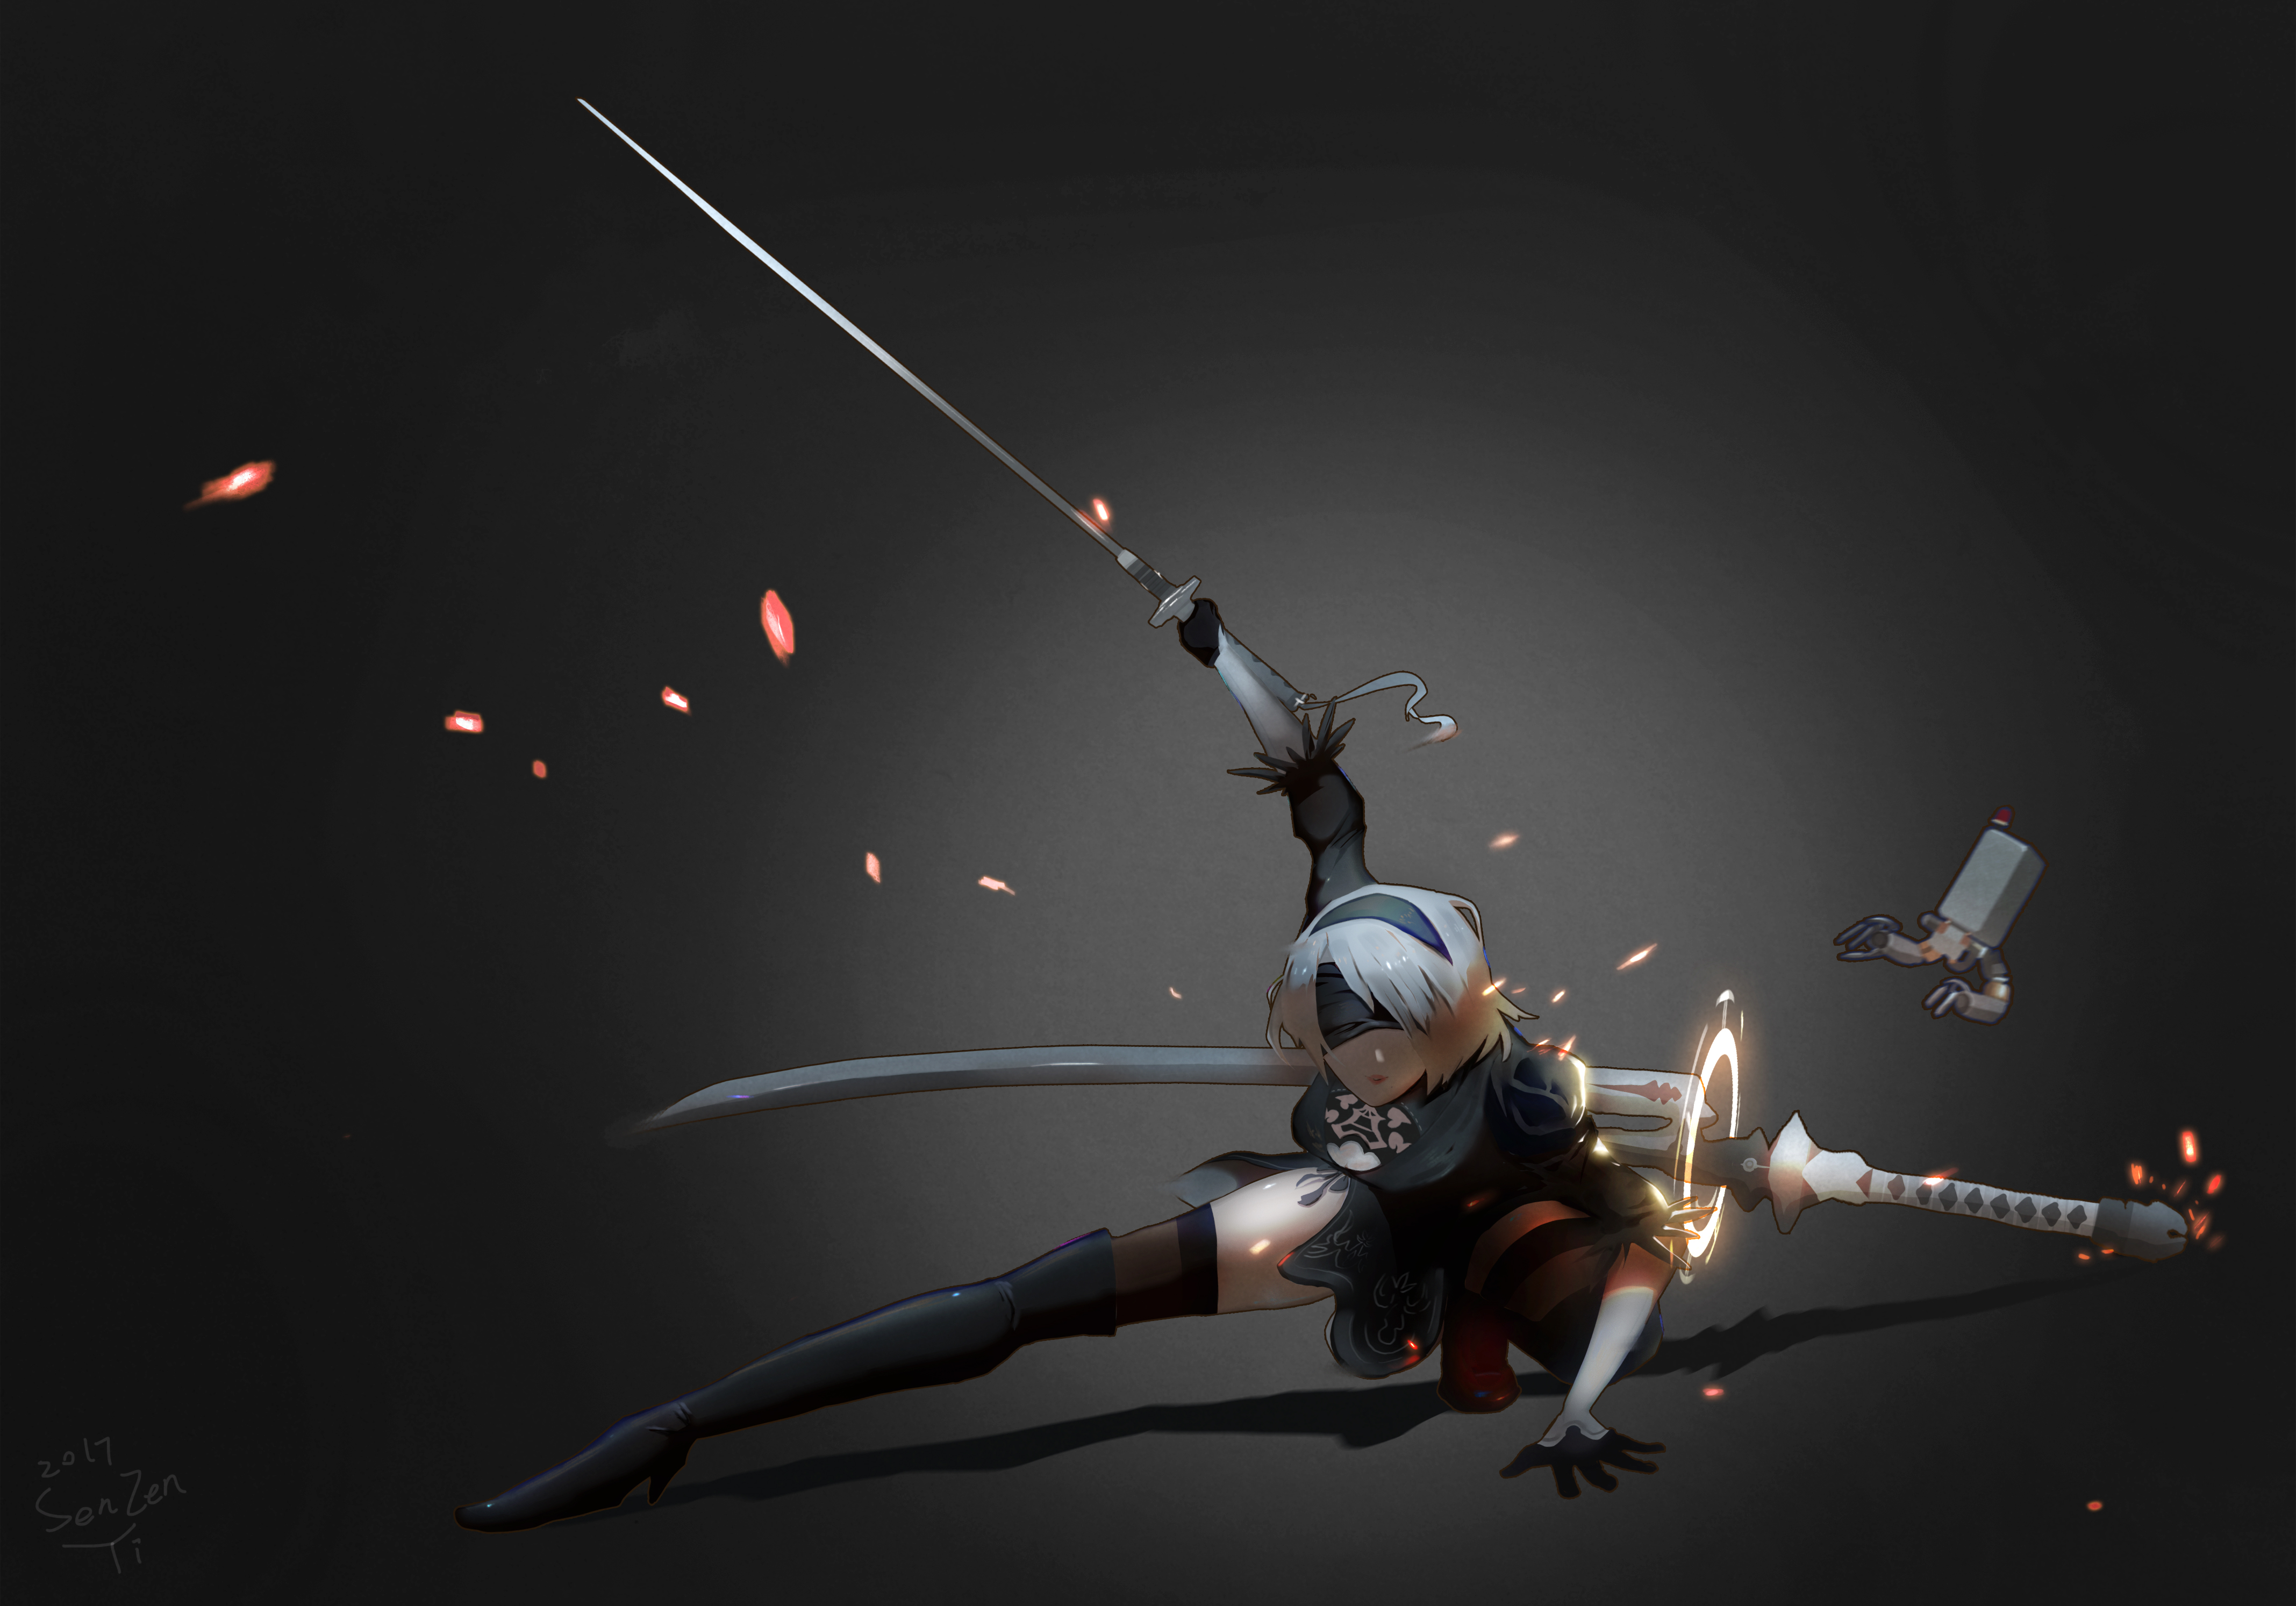 2b Nier Automata Katana Wallpaper Hd Anime 4k Wallpapers Images And Background Wallpapers Den